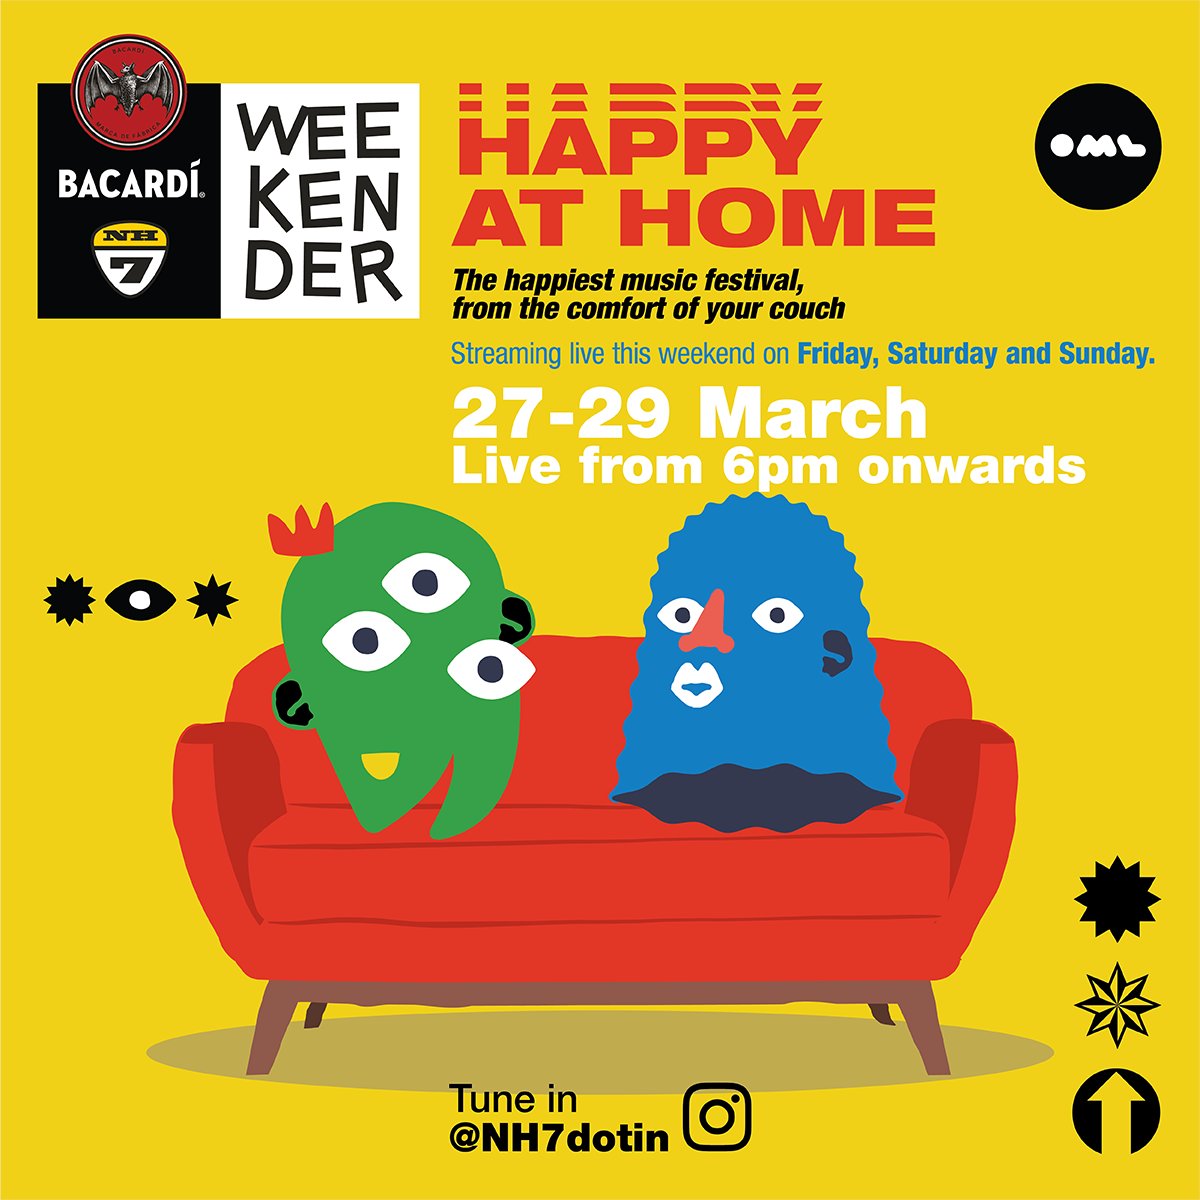 As we all do our bit by staying in, here’s some comfort & a chance to turn WFH into Weekender From Home. Tune in to #BACARDÍNH7 Weekender's #HappyAtHome for live streams every day from tomorrow till Sunday, 6 pm onwards. Instagram Live @ instagram.com/nh7dotin #DoWhatMovesYou